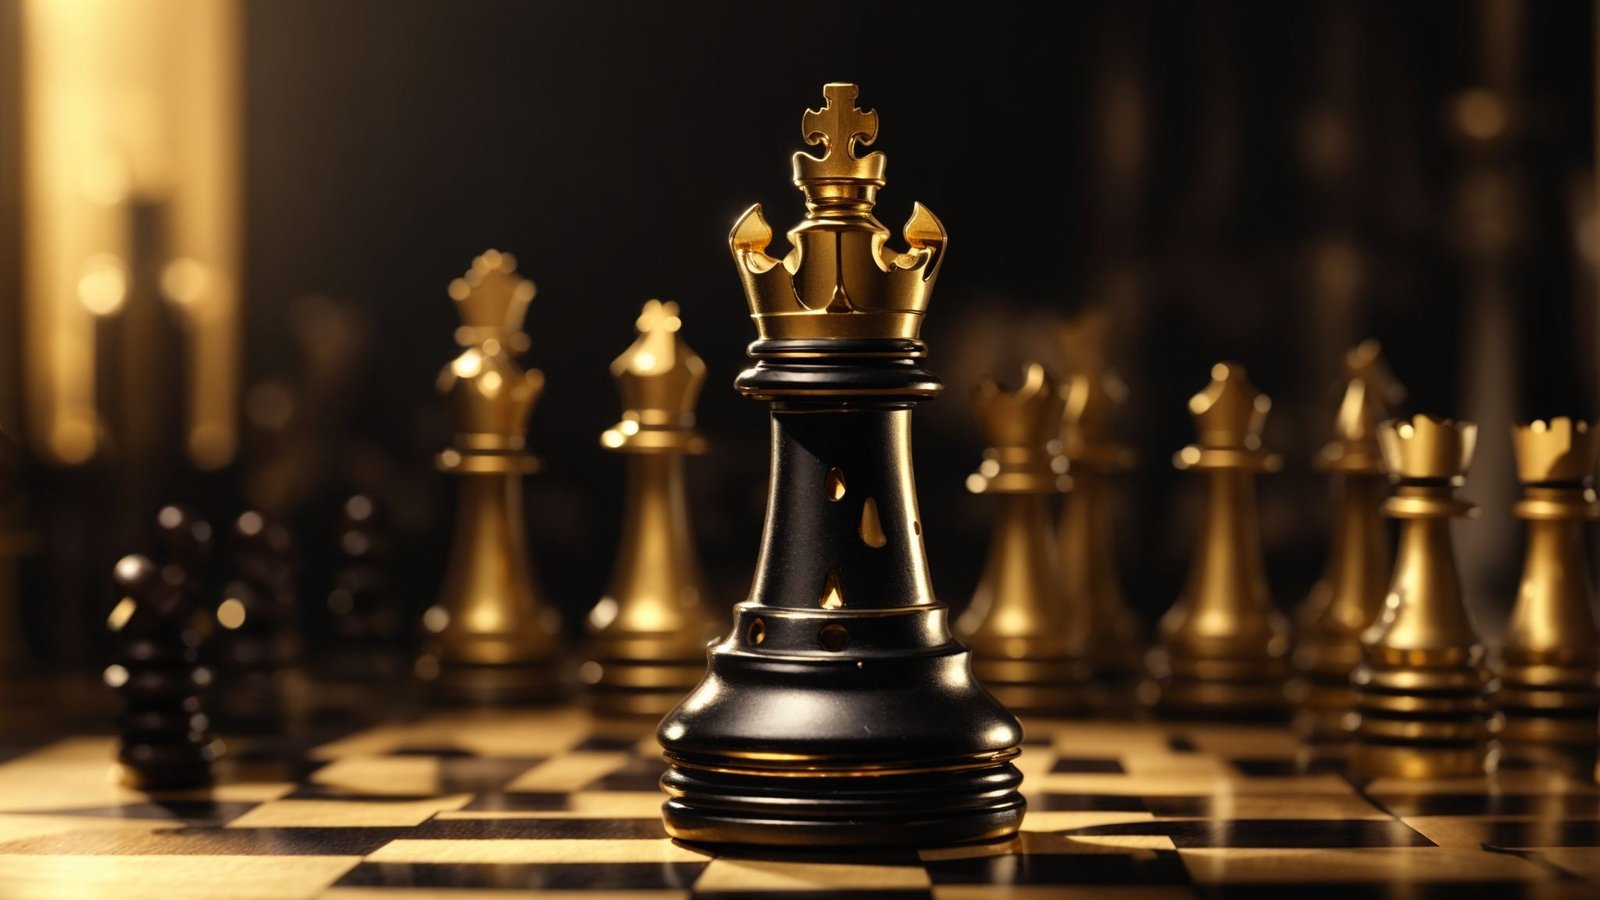 This image represents golden-black fancy chess.